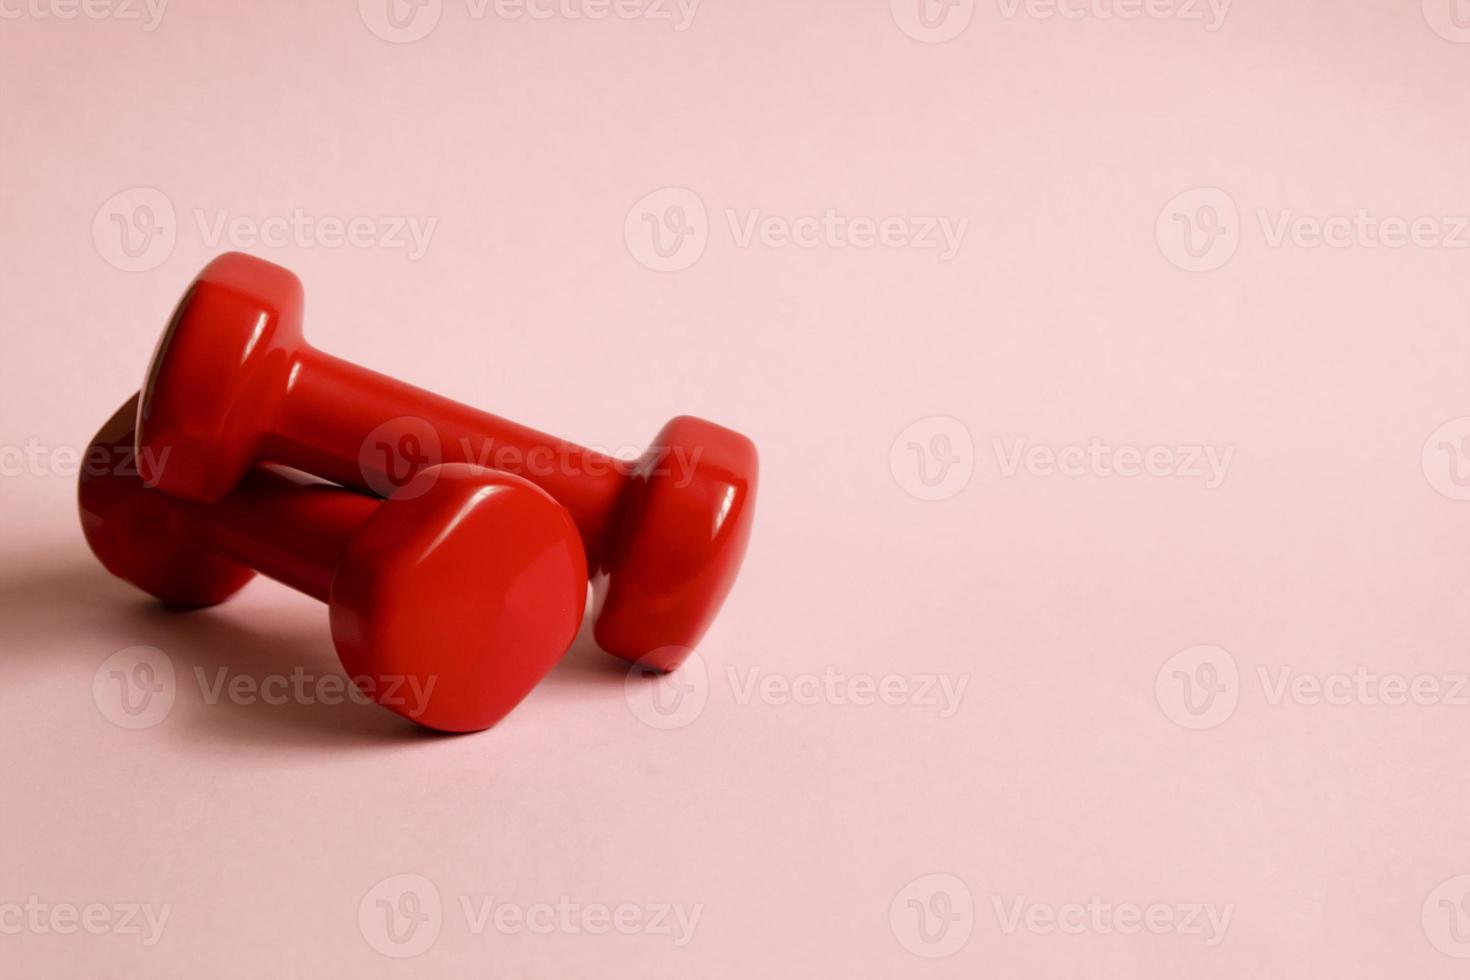 Two red dumbbells on a pink background. Sports equipment flat lay background photo